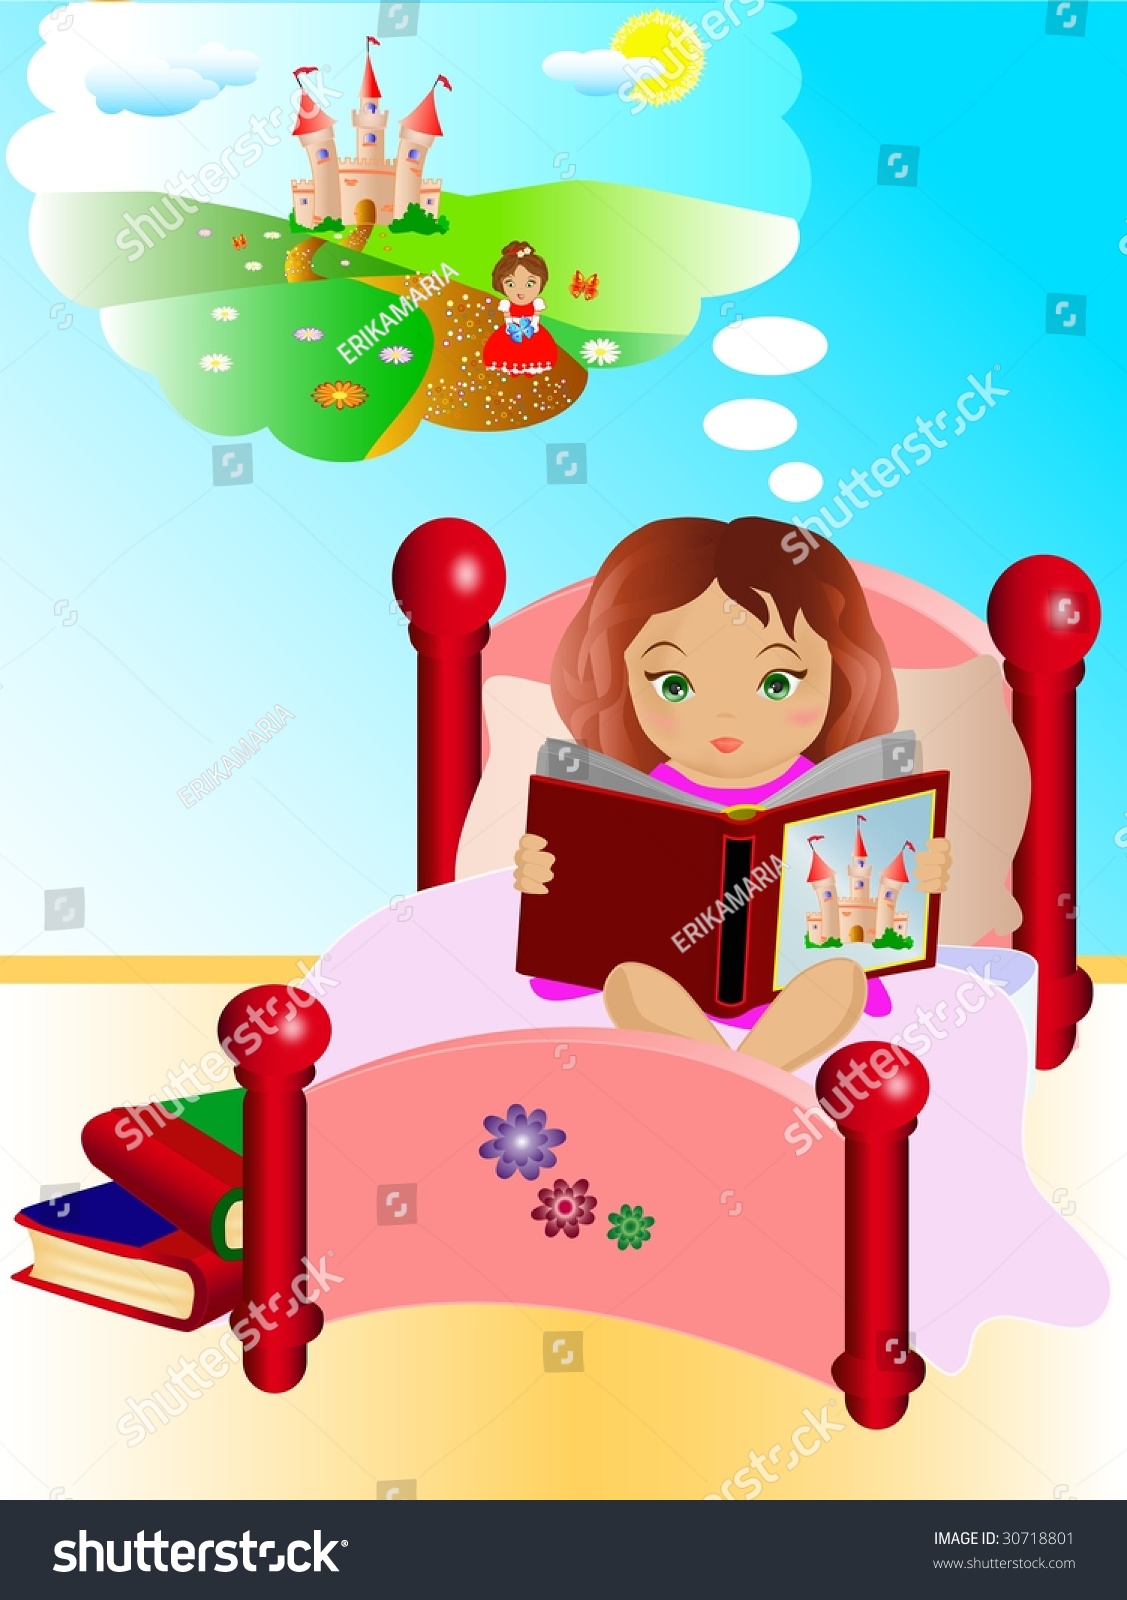 Reading And Imagination Stock Photo 30718801 : Shutterstock